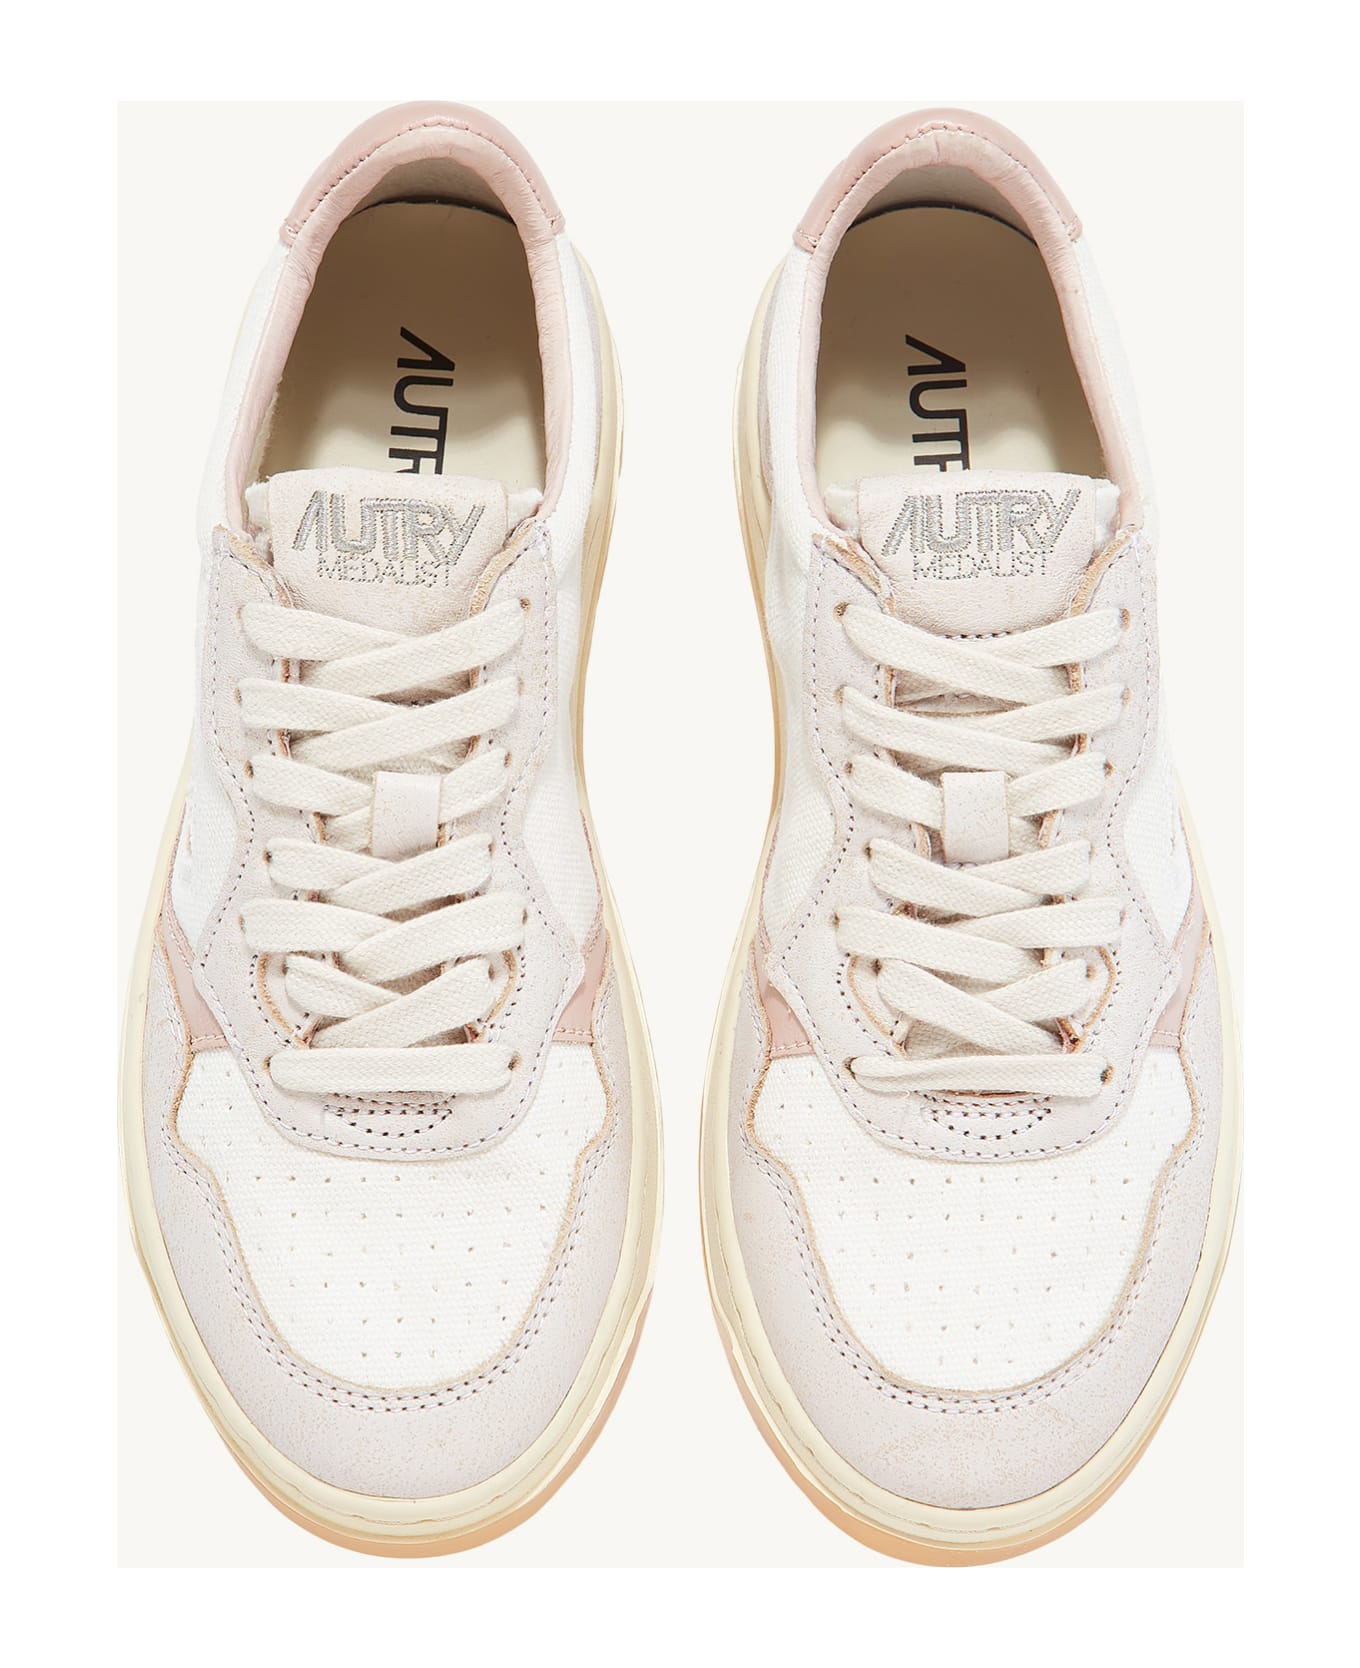 Autry Medalist Low Man Sneakers - White Pow